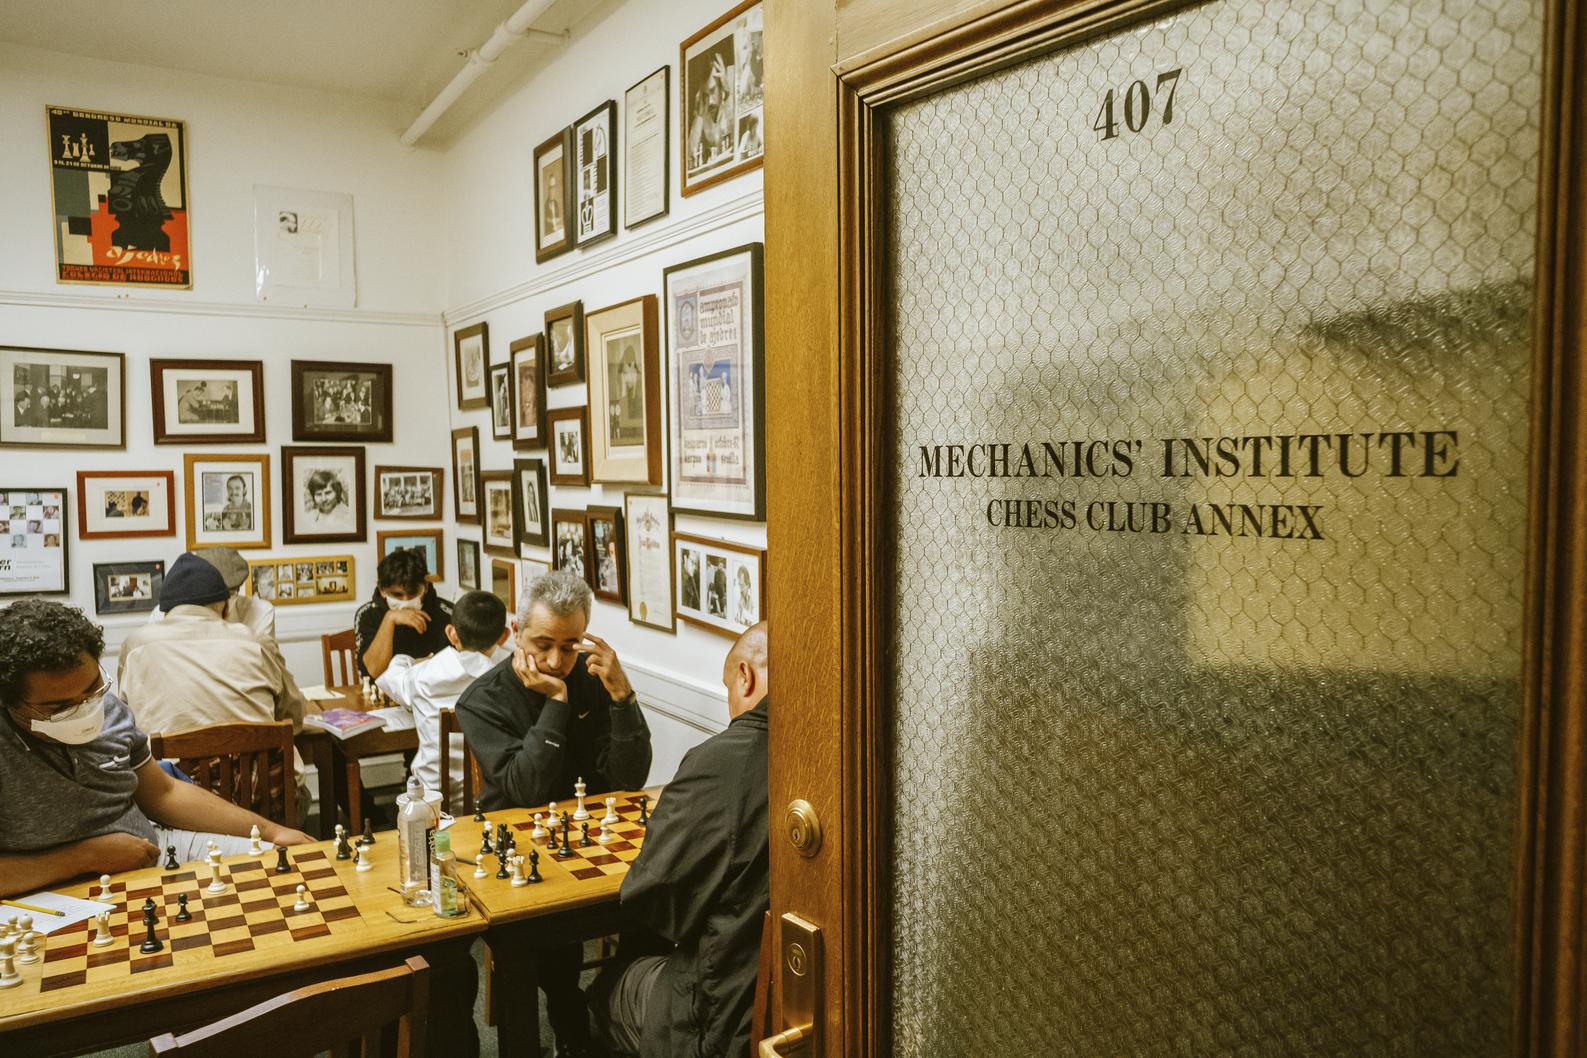 Queen's Gambit' fueling a Bay Area chess renaissance